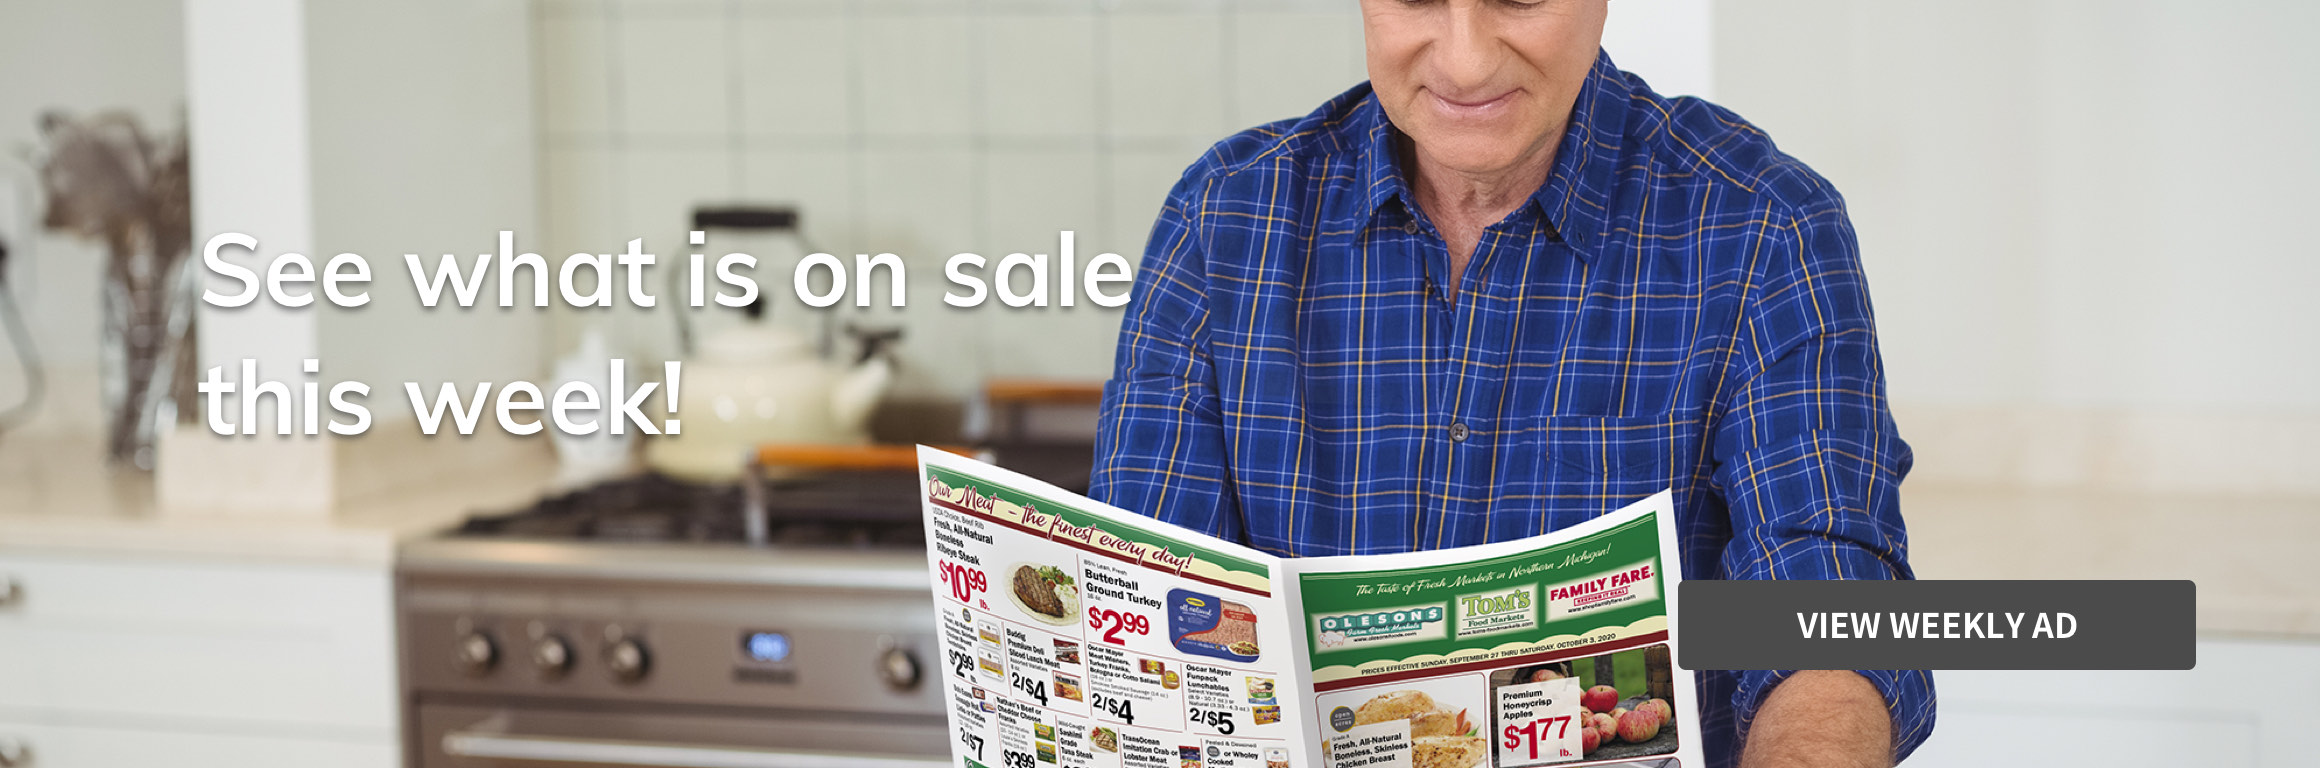 Man reading weekly ad in a kitchen.